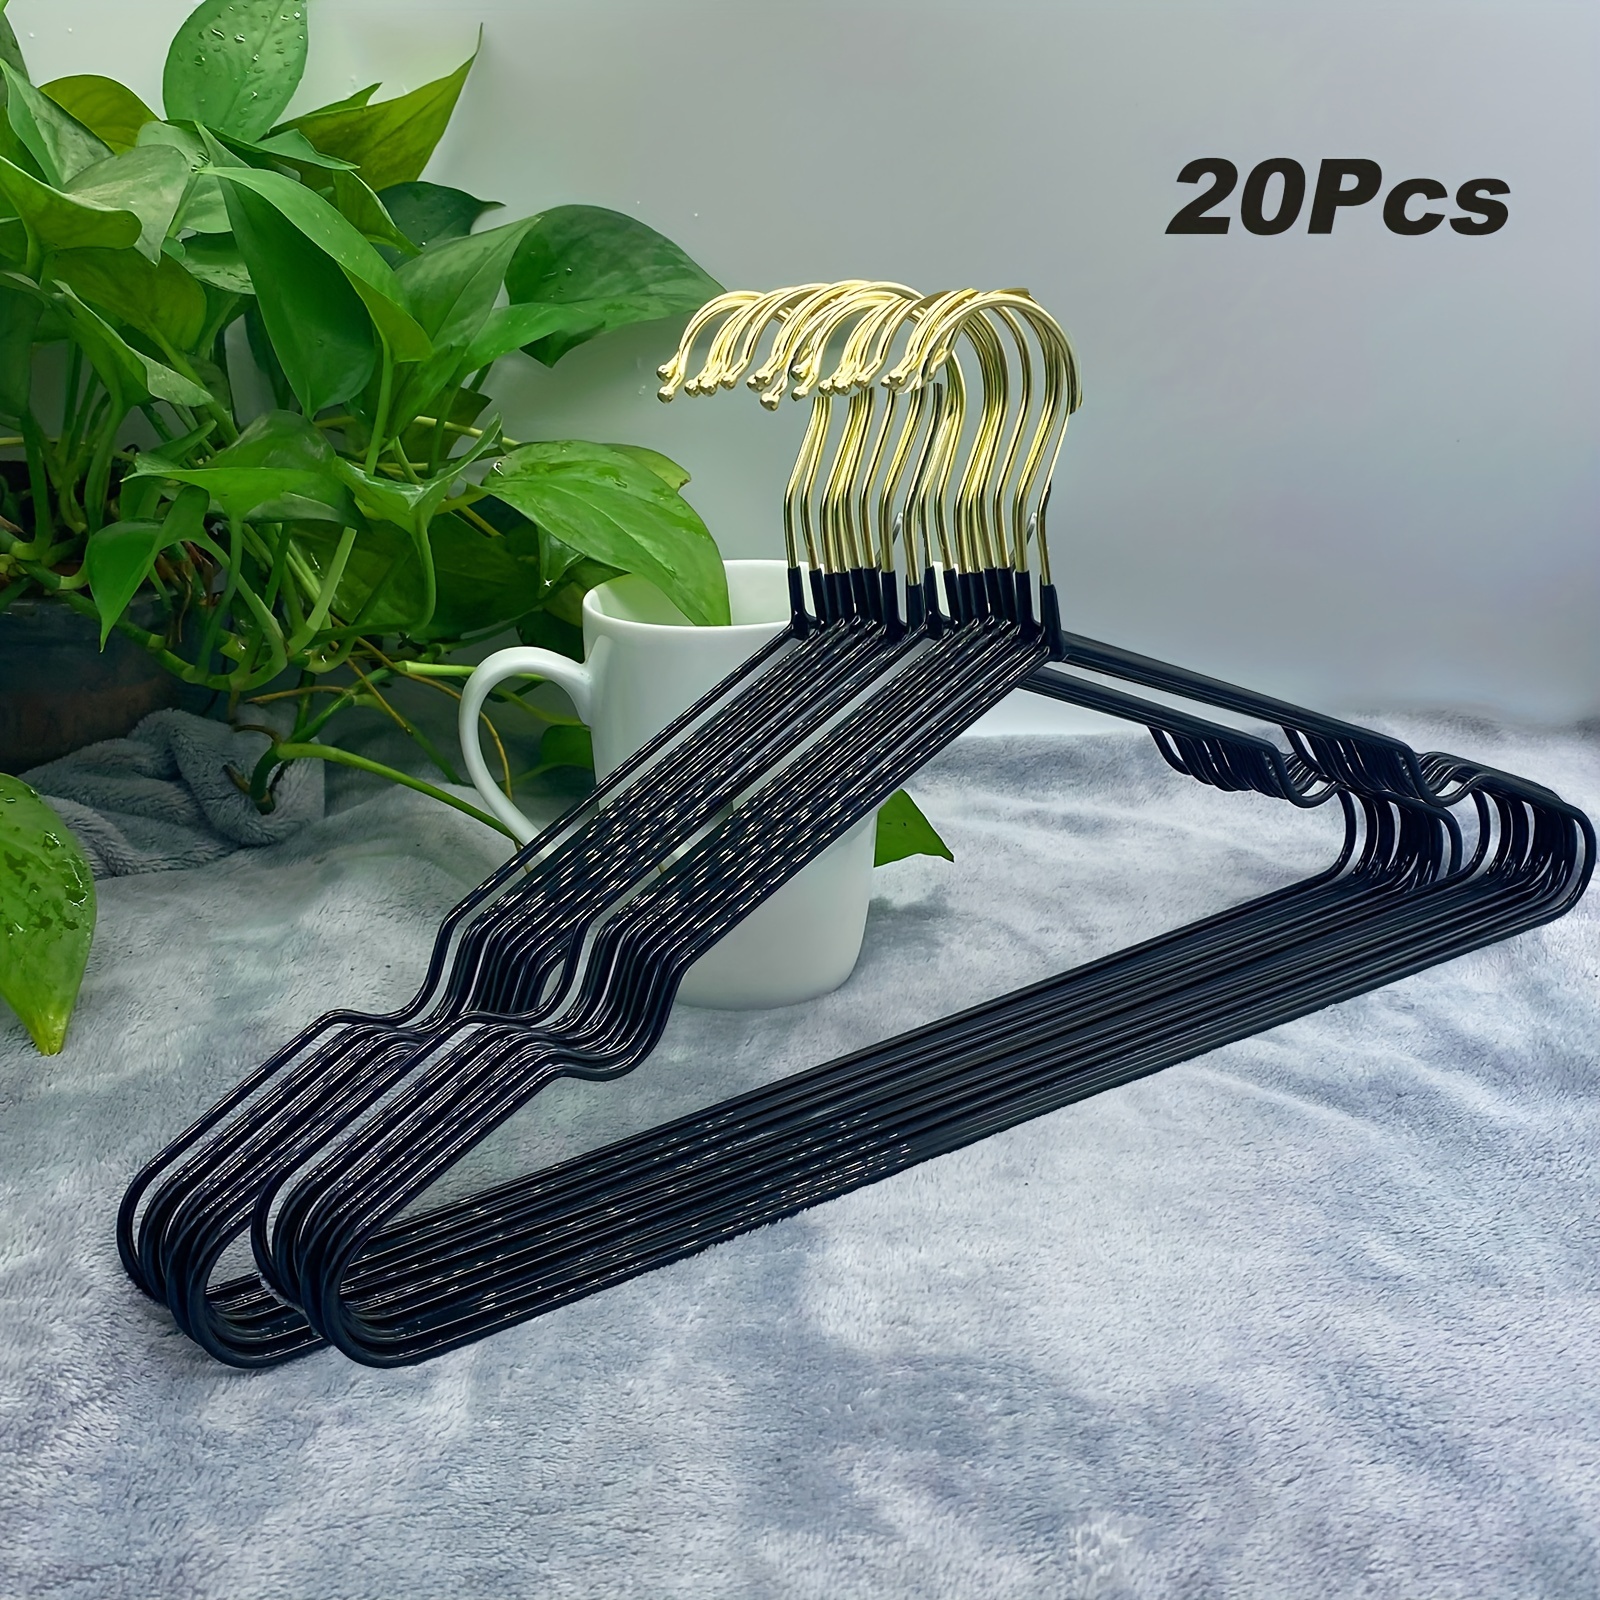 New Hangers Stainless Steel 40 cm 20Pcs Hangers for Clothes